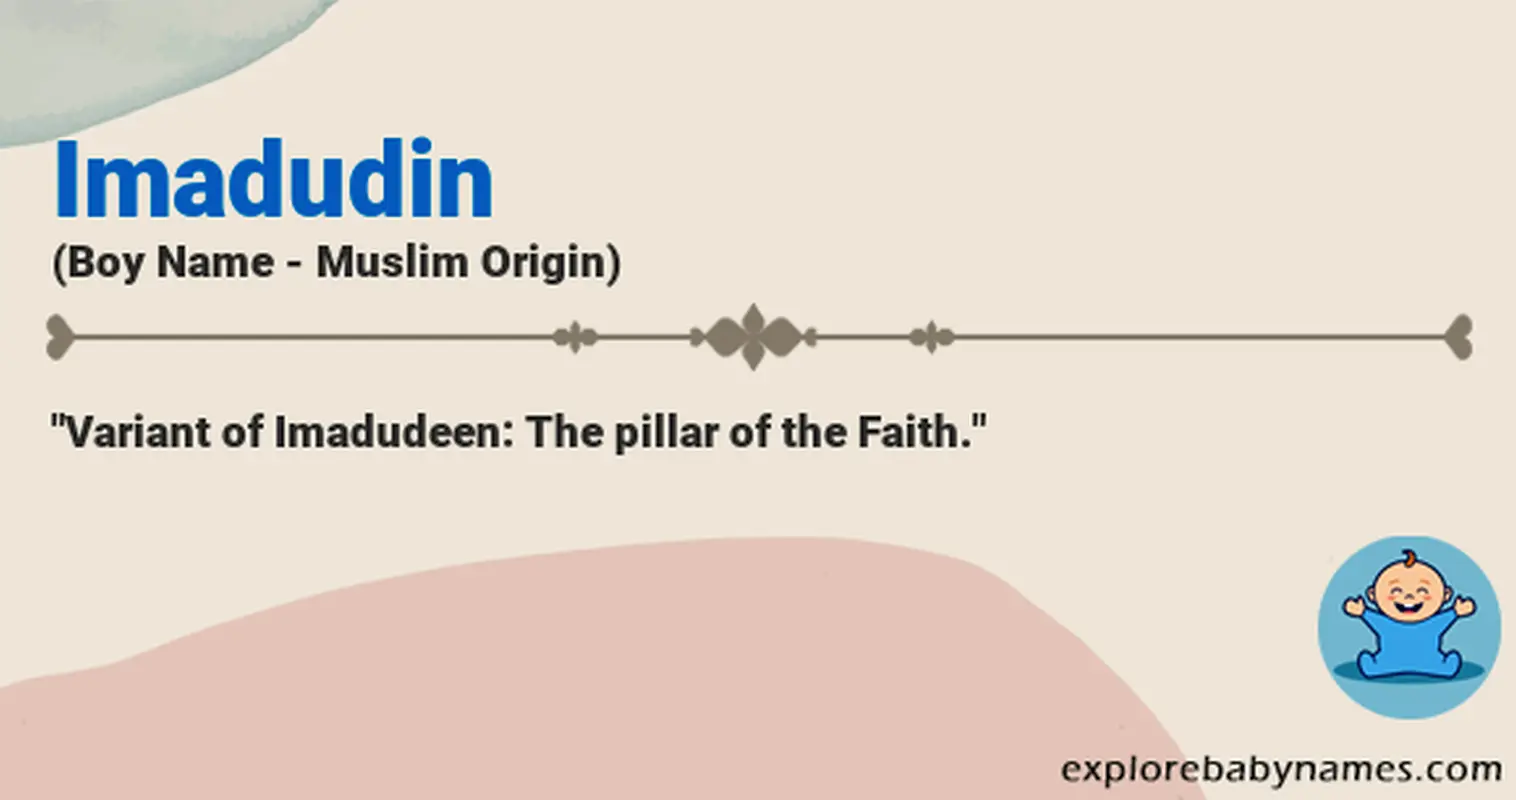 Meaning of Imadudin